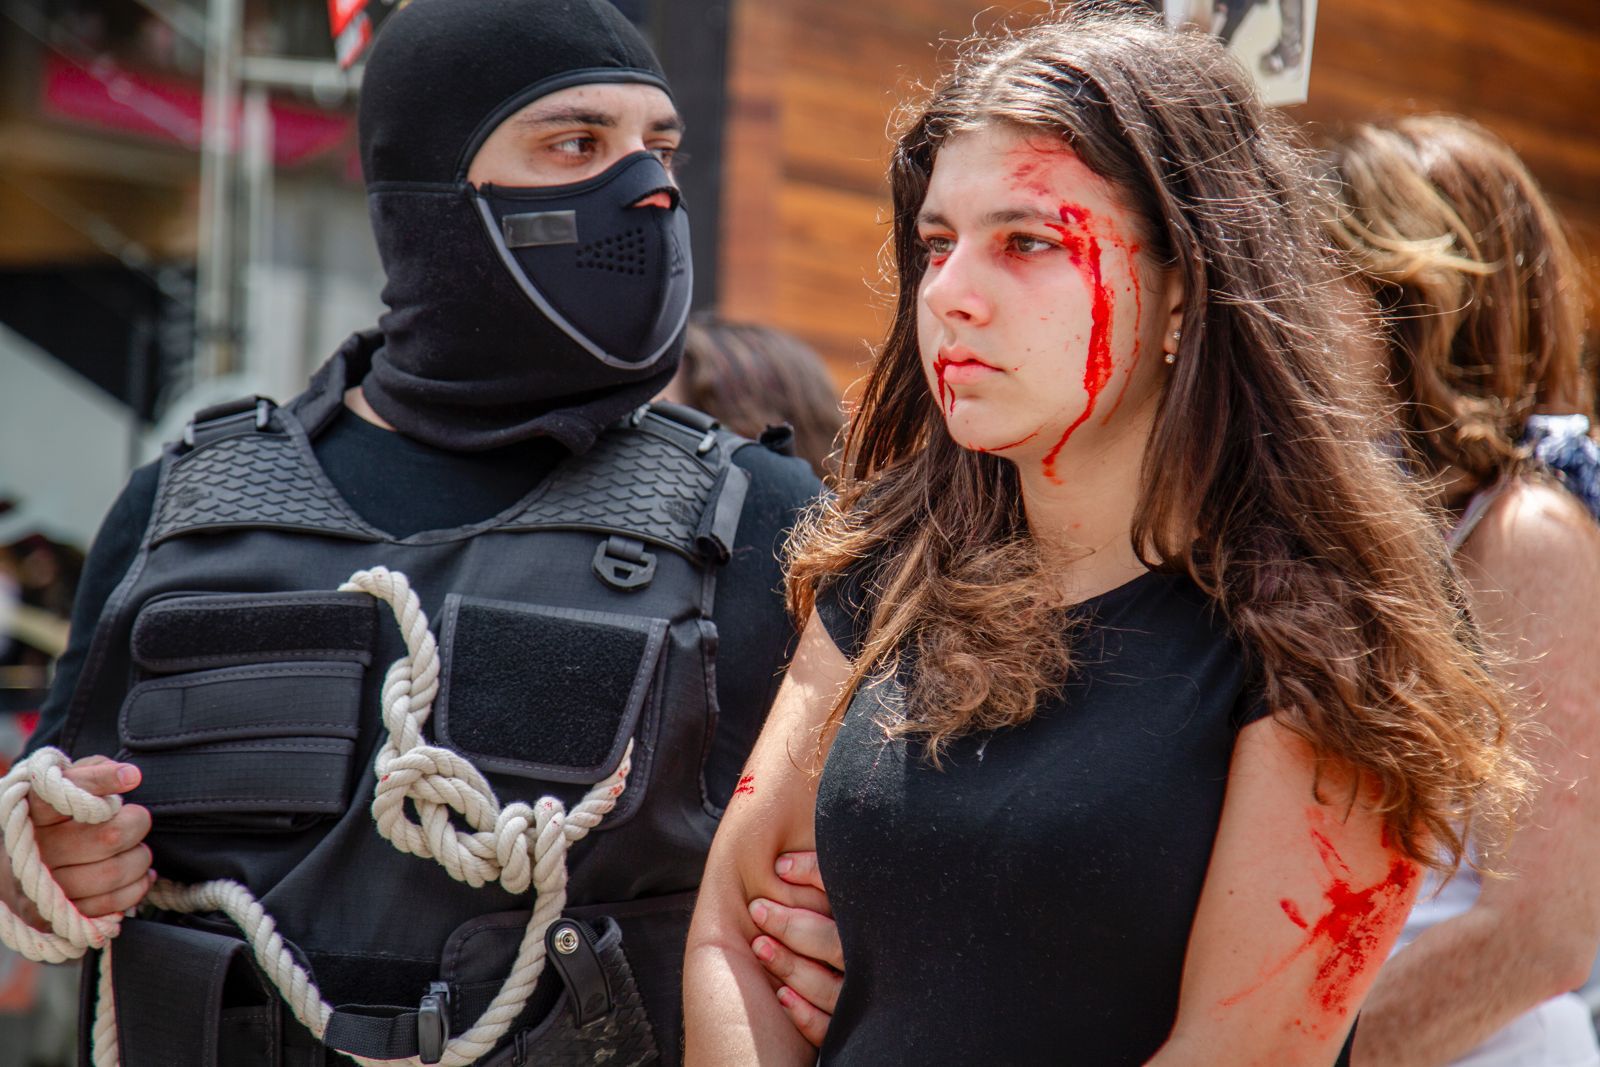 Bound and 'bloodied' girl shocks Brazilians into comprehending Hamas  horrors | The Times of Israel